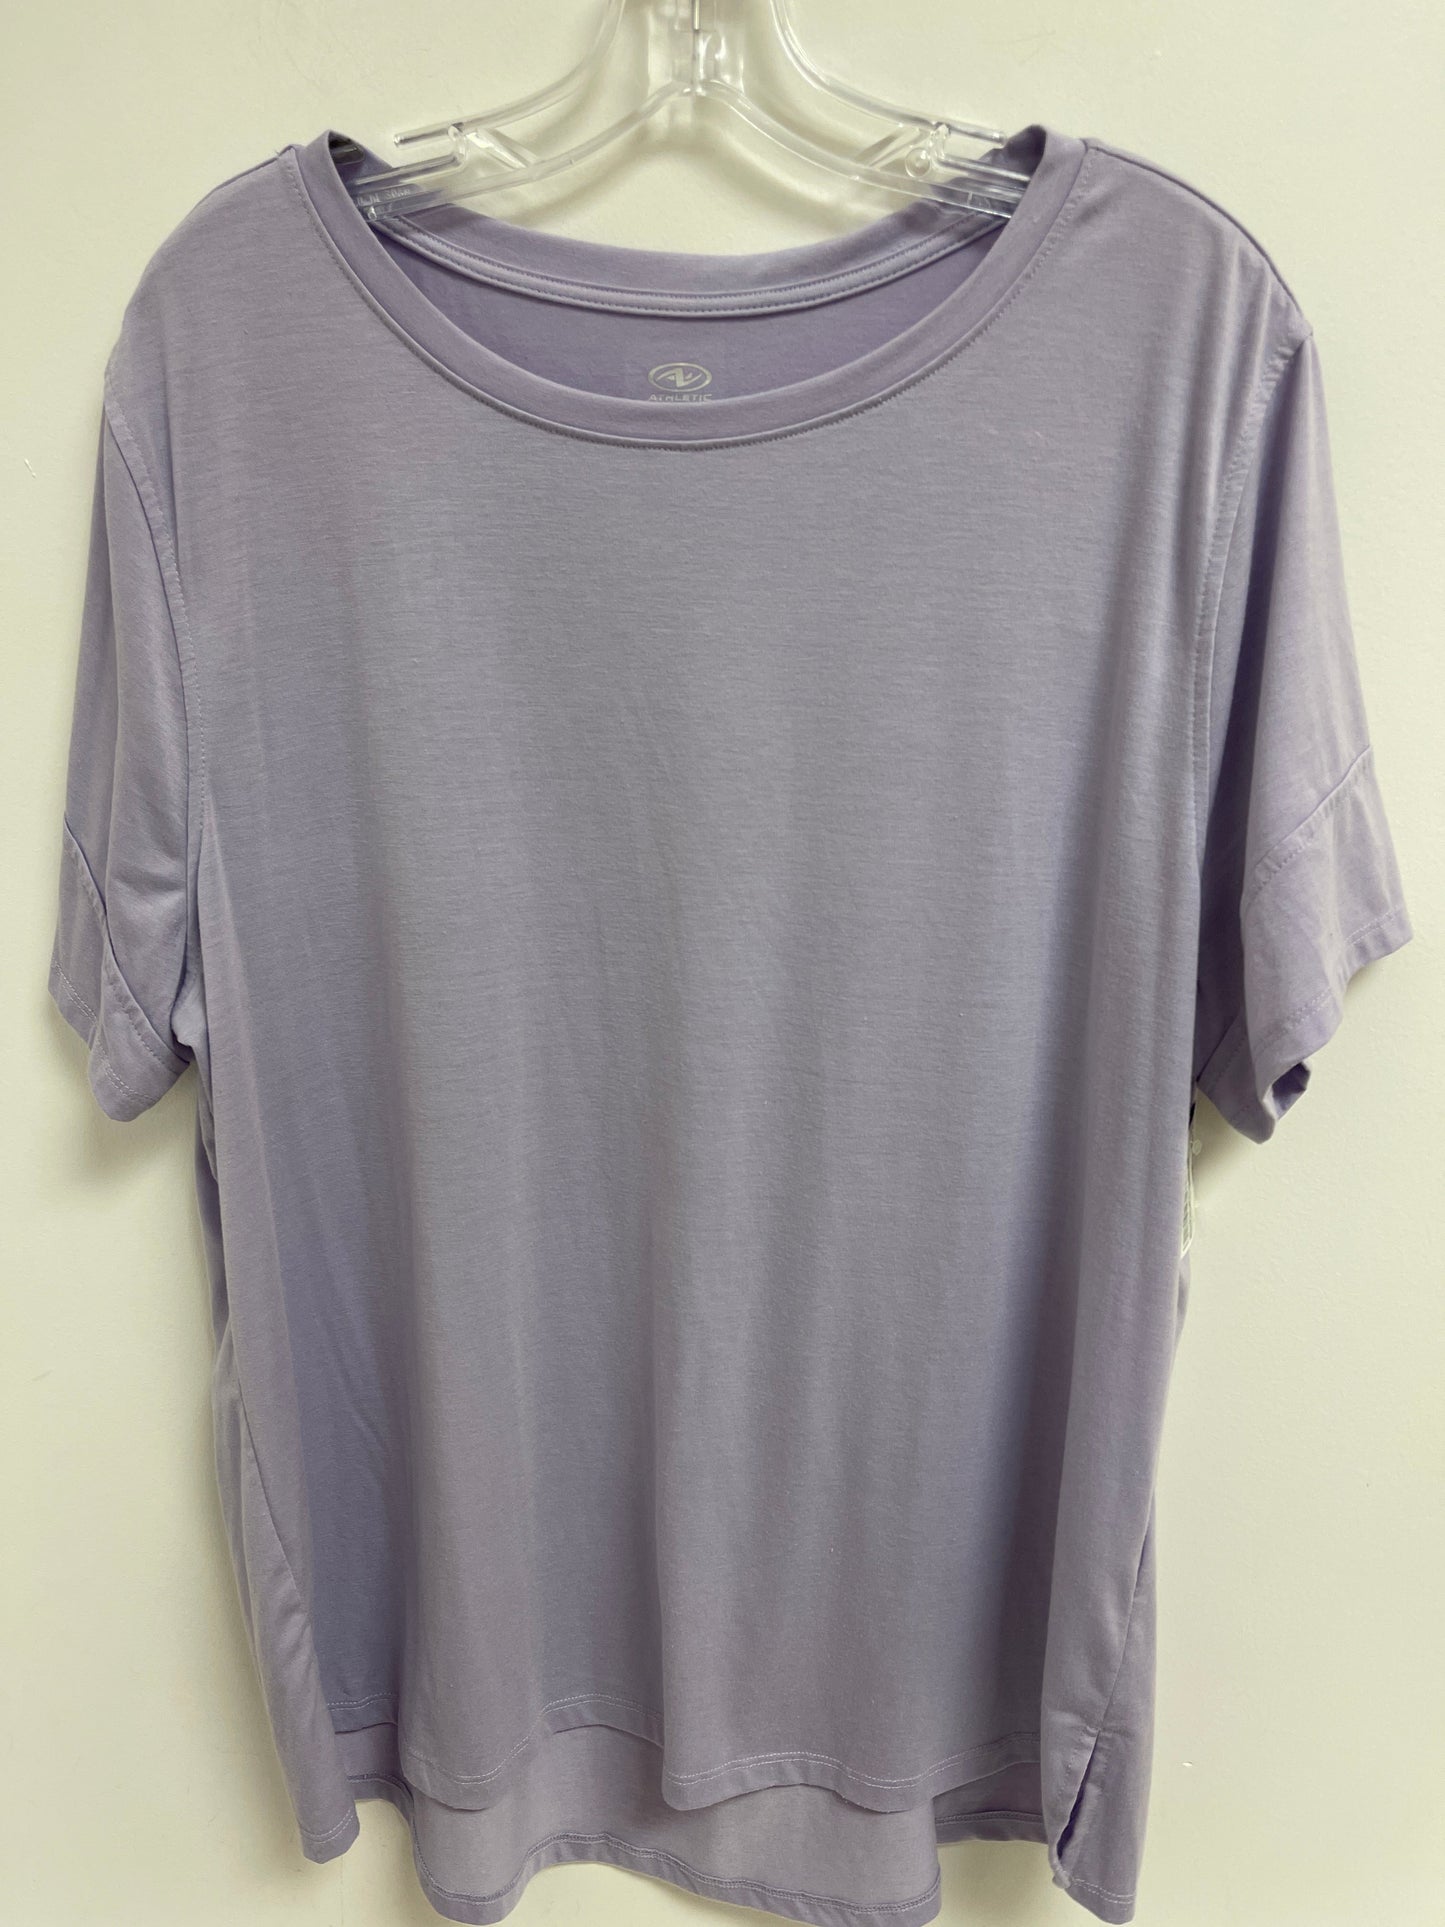 Purple Athletic Top Short Sleeve Athletic Works, Size 2x